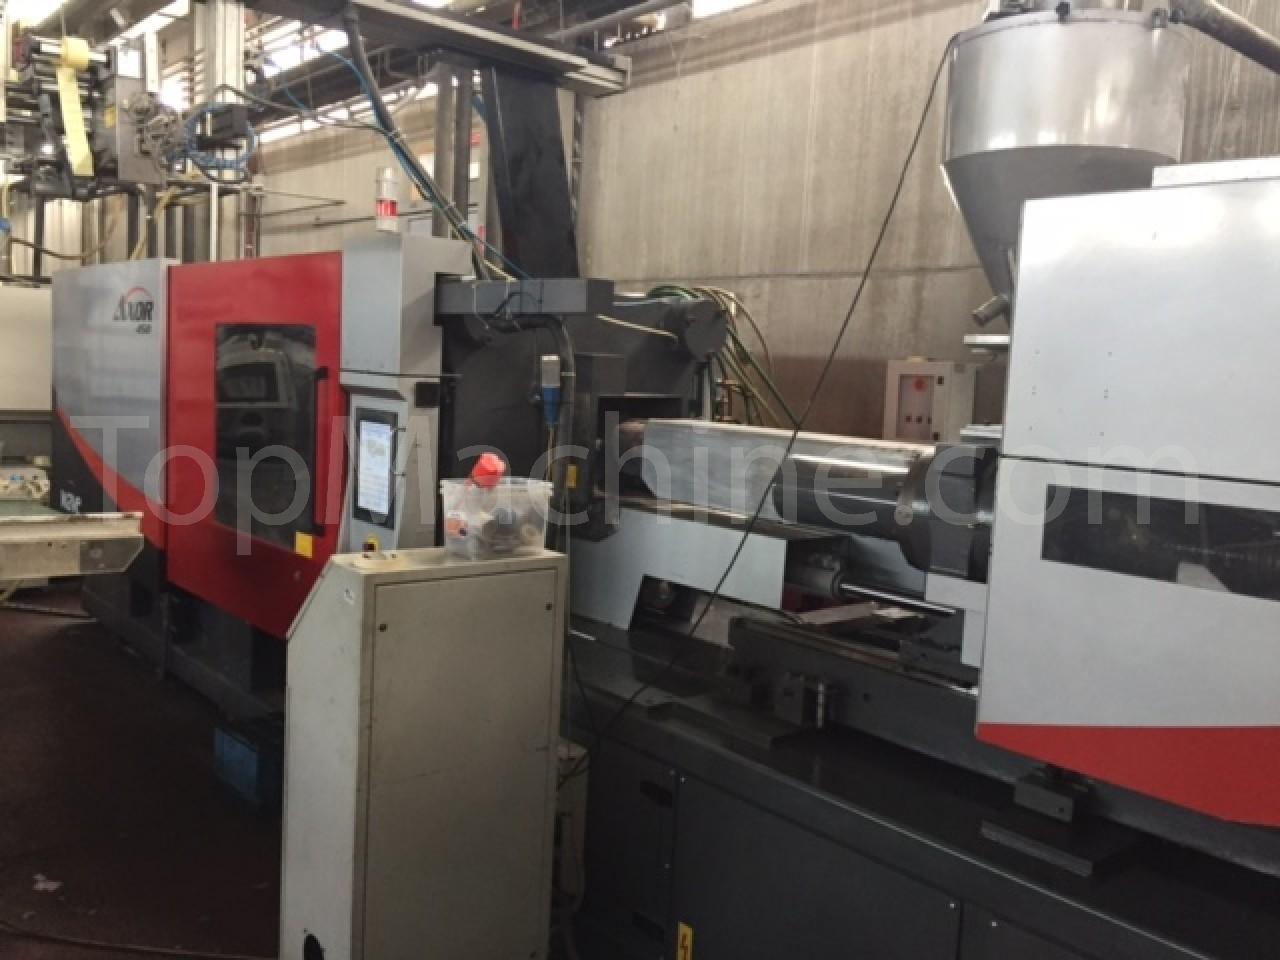 Used Wave Swiss Axor 450/3237 HS45 (Full electric) Injection Moulding Clamping force up to 1000 T